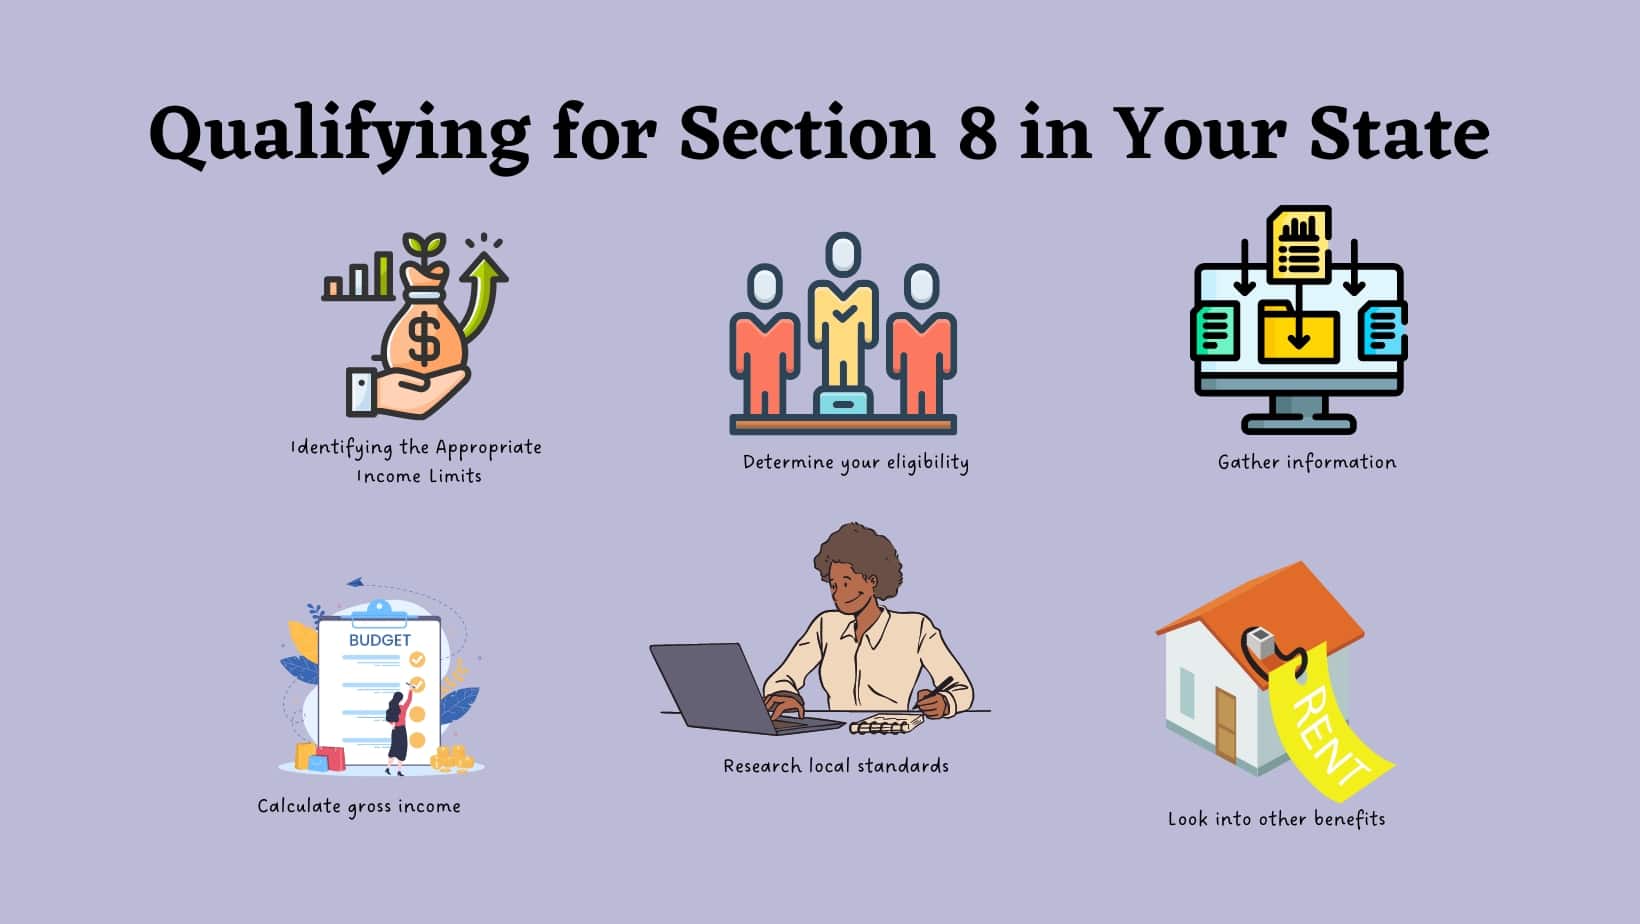 Qualifying for Section 8 in Your State